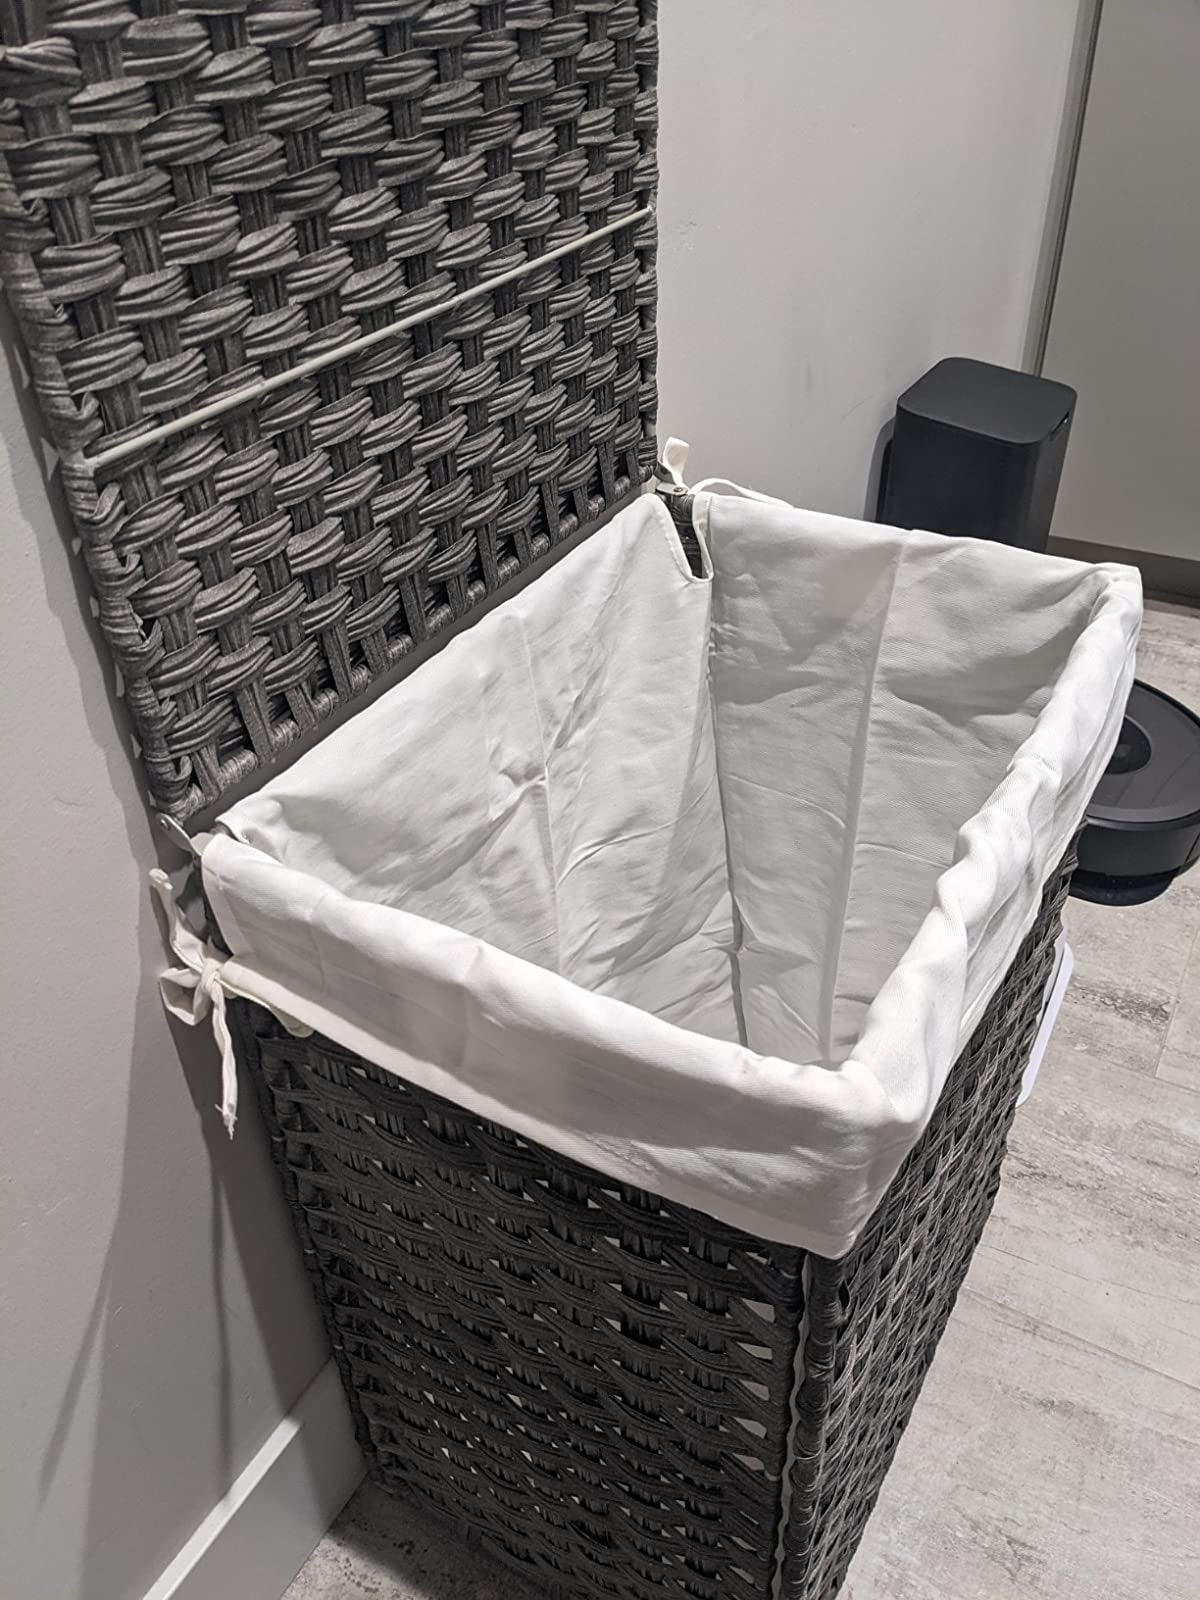 Dream Lifestyle Strong Mesh Pop-up Laundry Hamper,Quality Collapsible  Laundry Basket with Durable Handles Solid Bottom,Easy to Open and Fold Flat  for Storage 